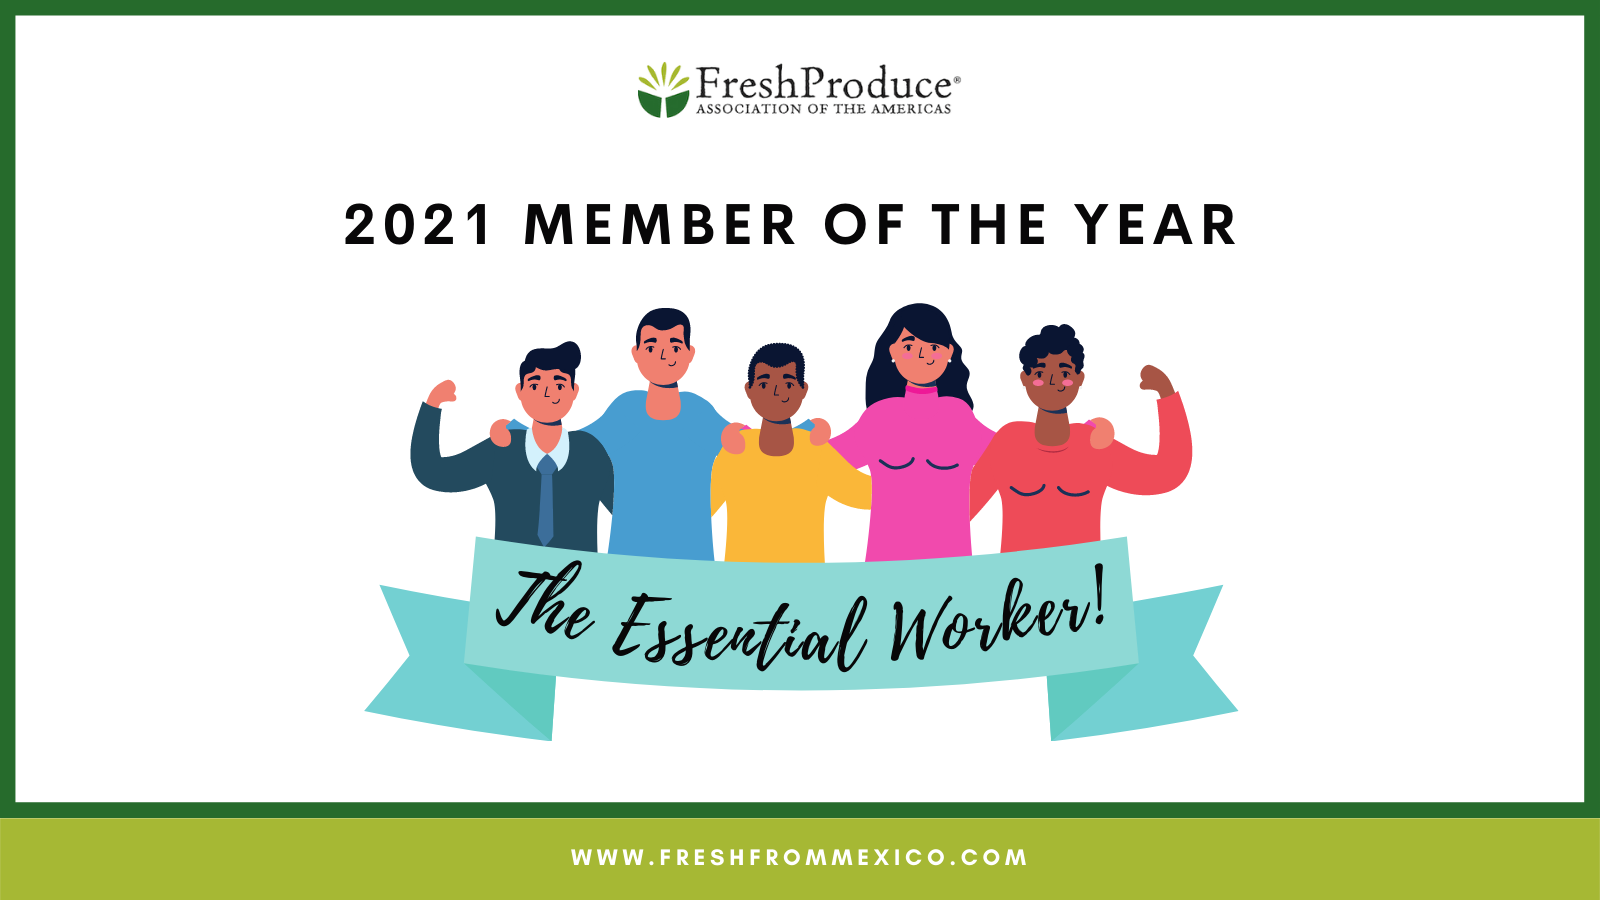 2021 Member of the Year- The Essential Worker